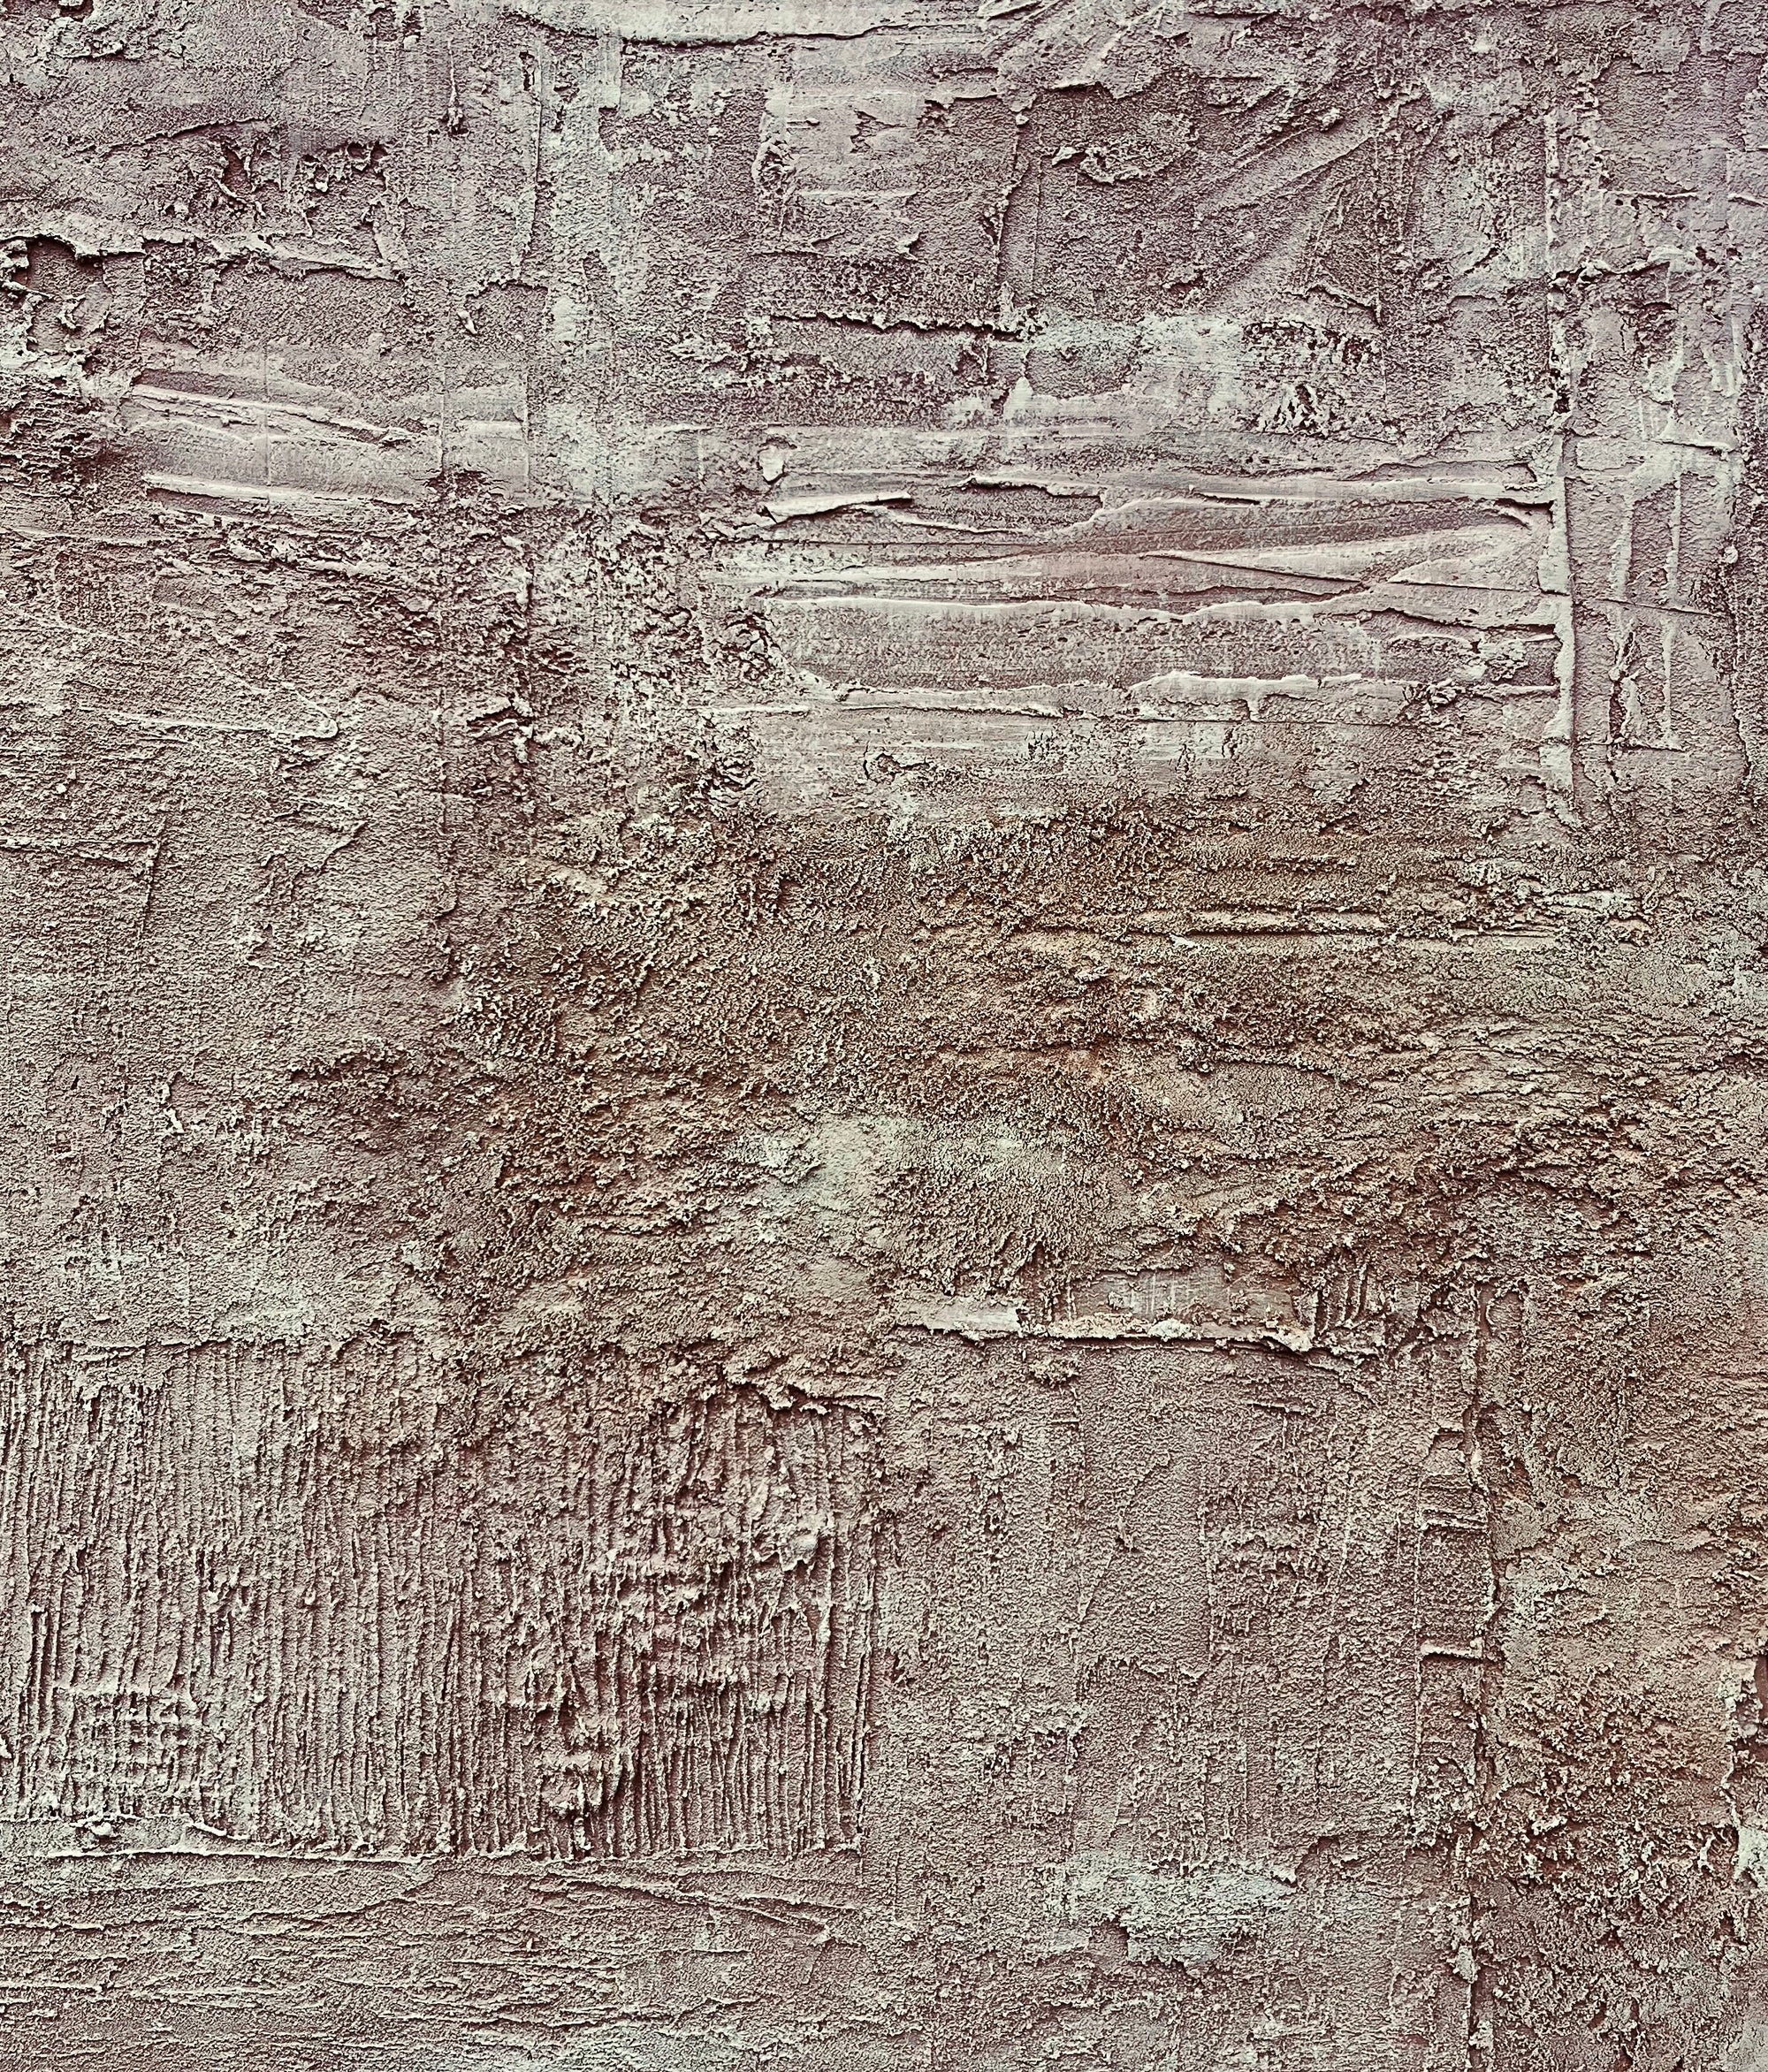 rose gold toned painting concrete, sand, raw pigment textured abstract contemporary painting detail photos